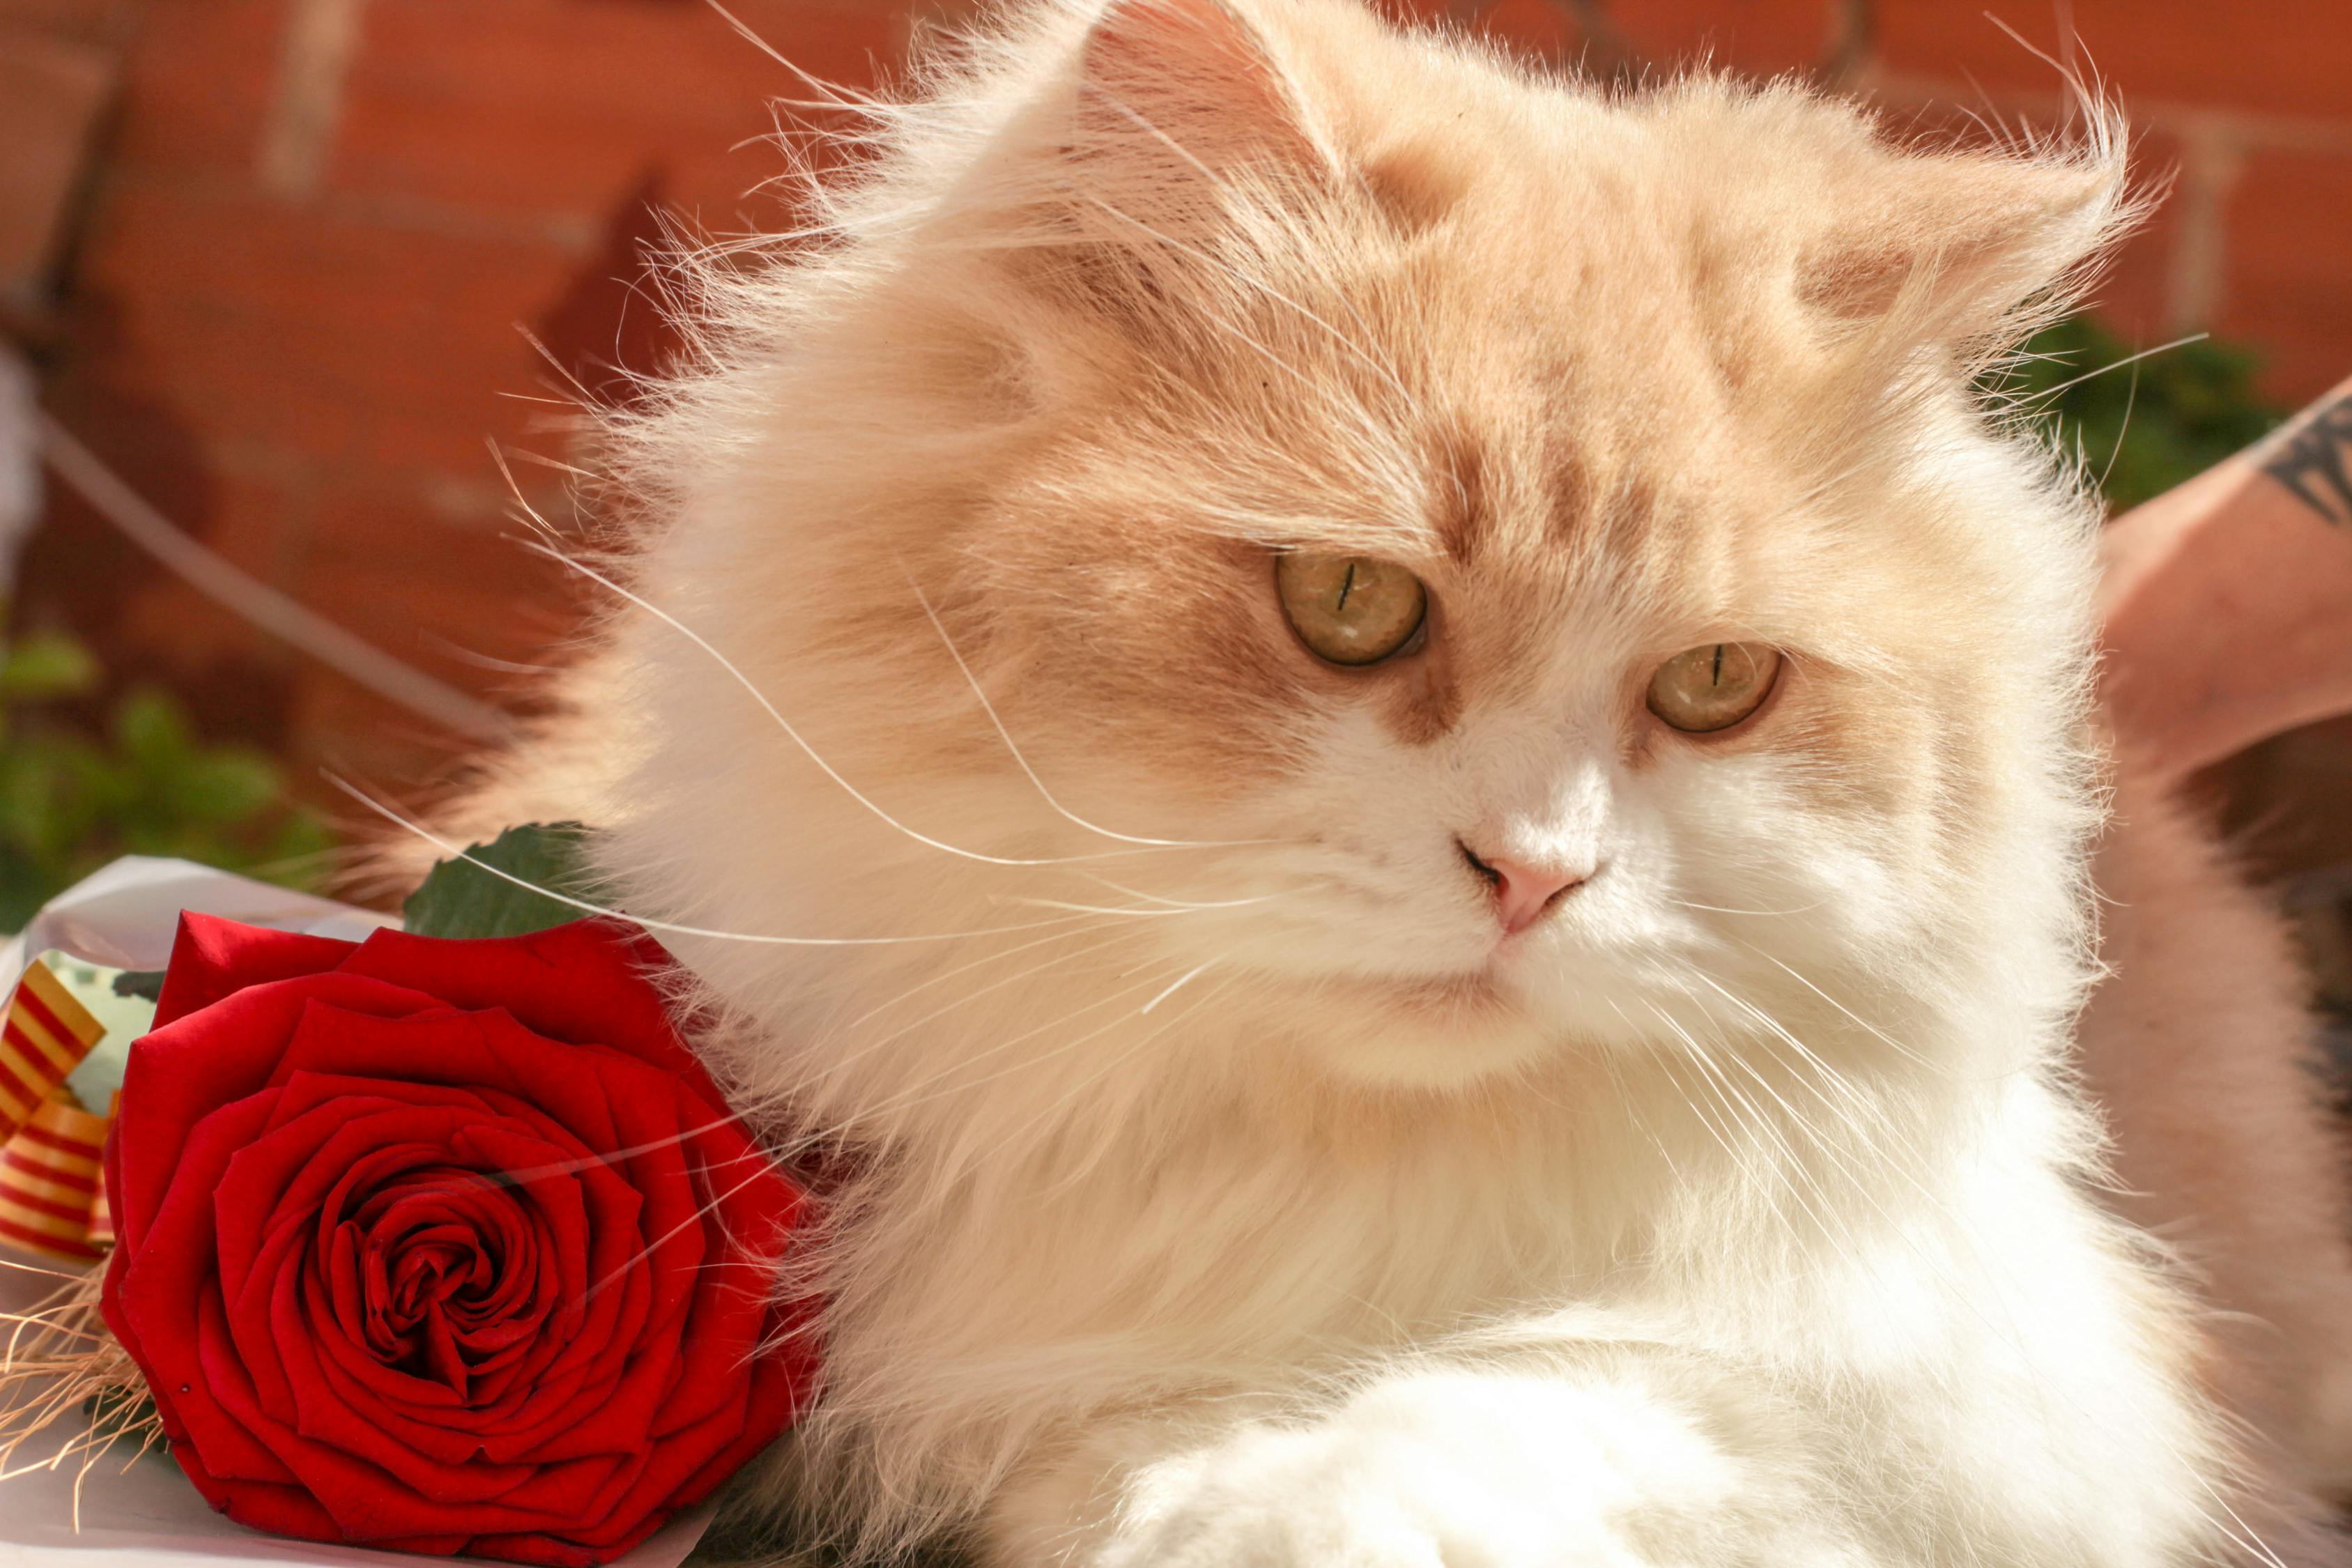 White and Beige Persian Cat Beside Red Rose